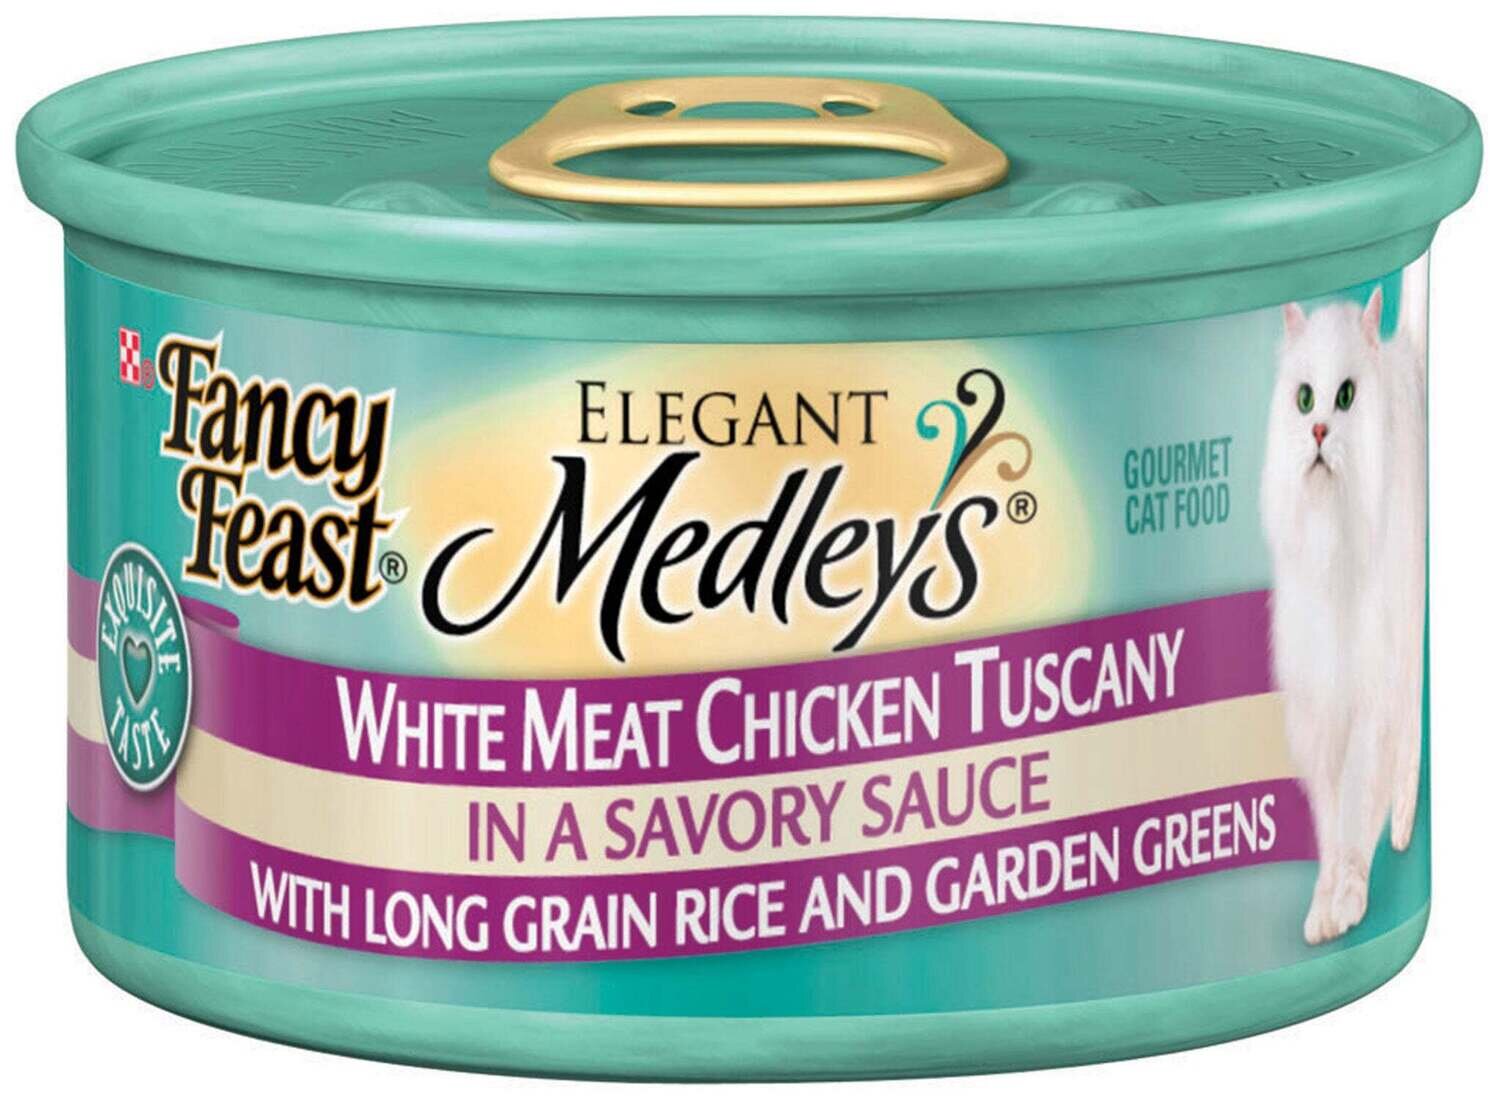 Fancy Feast Elegant Medleys White Meat Chicken Tuscany Canned Cat Food 3-oz, case of 24